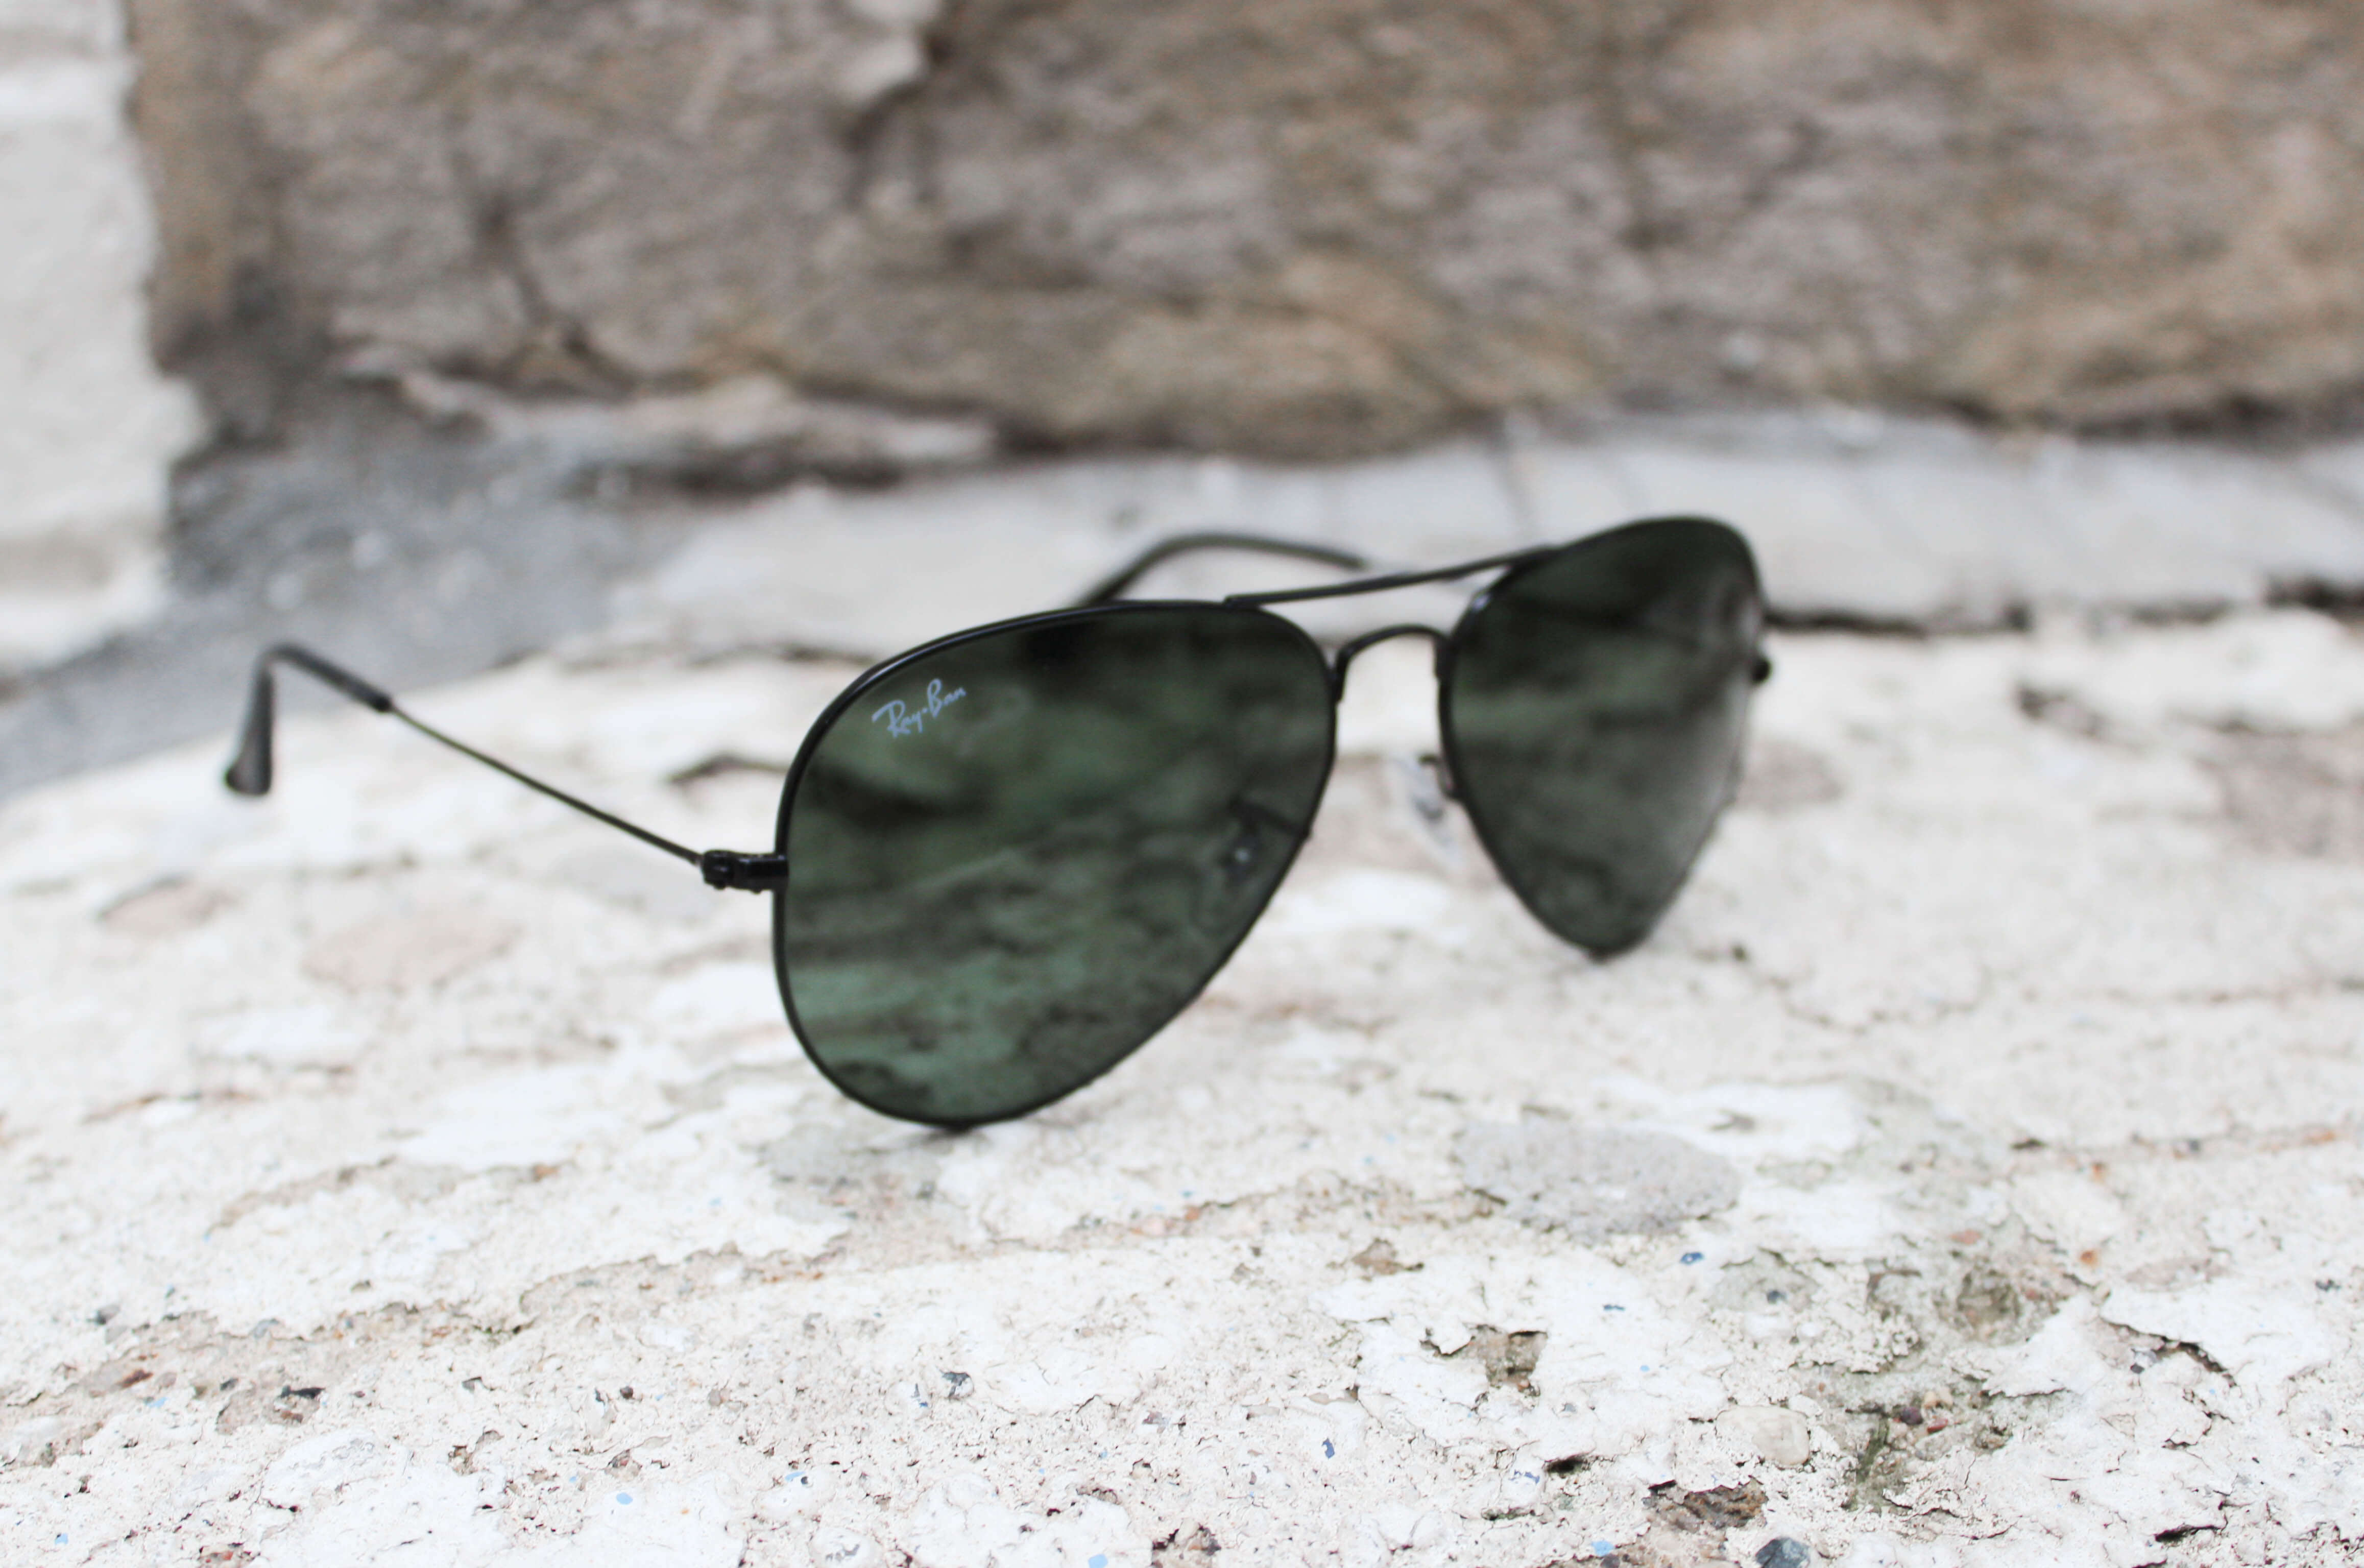 My Favorite Fall Sunglasses Now Available at Kohl's (Ray-Ban Aviators)